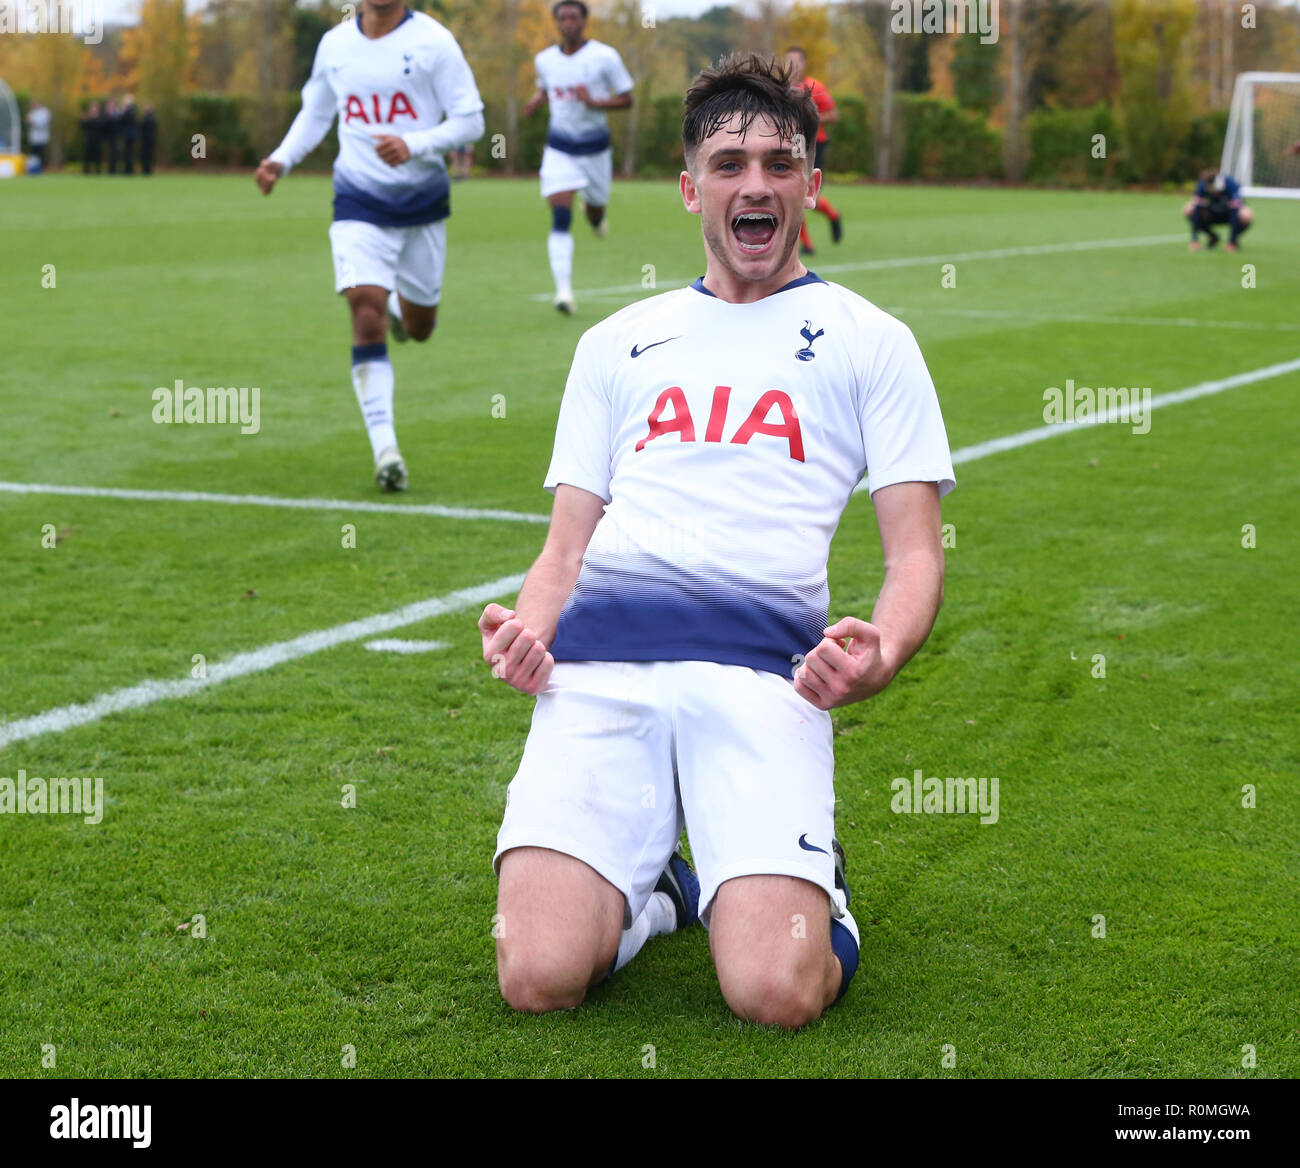 Enfield, UK. 06 November, 2018 Troy Parrott of Tottenham Hotspur  celebrates his goal during UEFA Youth League match between Tottenham Hotspur and PSV Eindhoven at Hotspur Way, Enfield.   FA Premier League and Football League images are subject to DataCo Licence EDITORIAL USE ONLY No use with unauthorised audio, video, data, fixture lists (outside the EU), club/league logos or 'live' services. Online in-match use limited to 45 images (+15 in extra time). No use to emulate moving images. No use in betting, games or single club/league/player publications/services. Credit: Action Foto Sport/Alamy Stock Photo